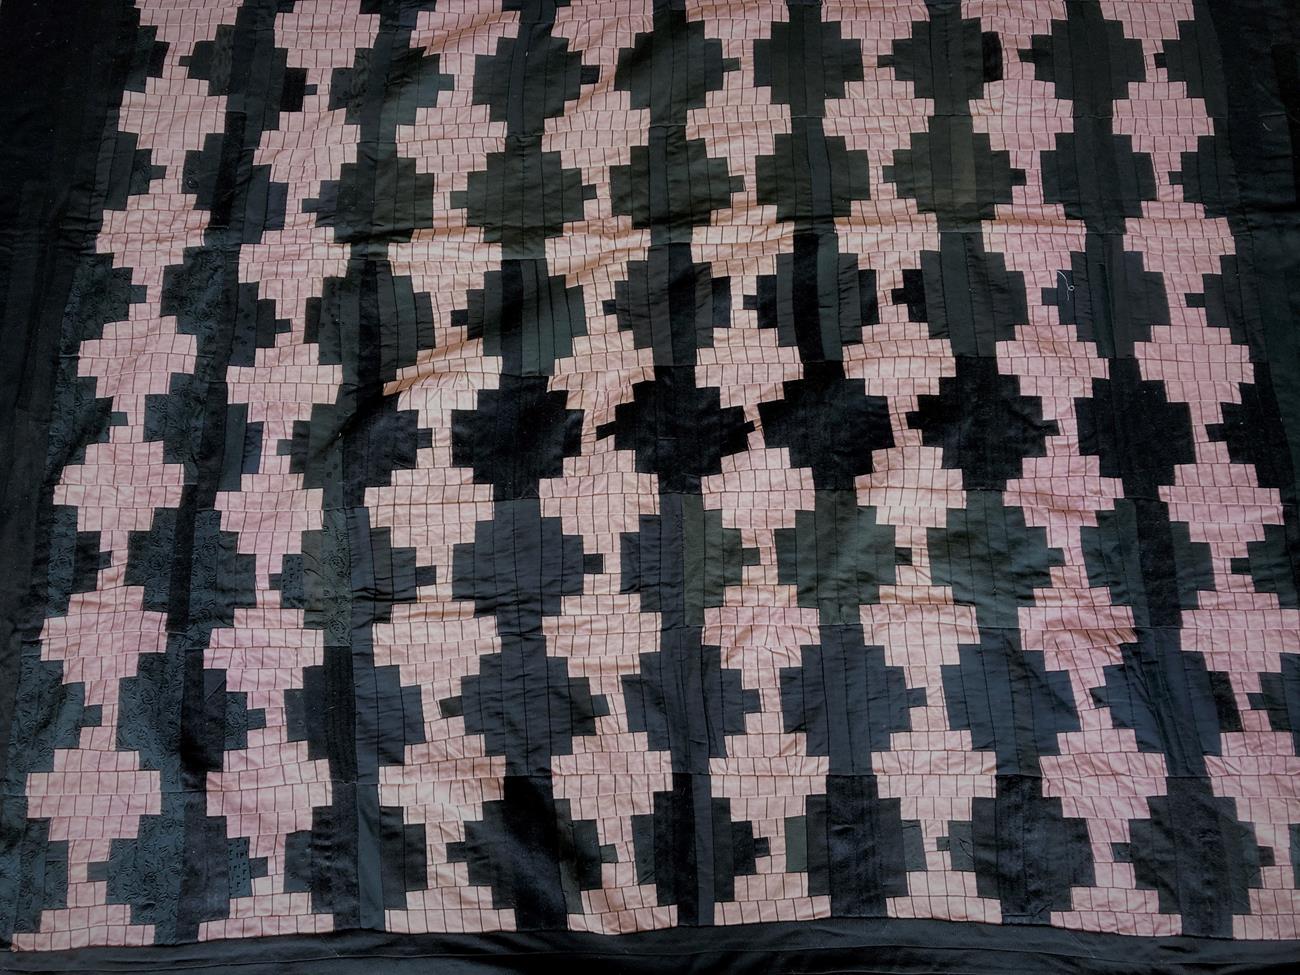 Lot 2008 - Late 19th/Early 20th Century Patchwork Quilt, incorporating pink and black patchwork motifs on...